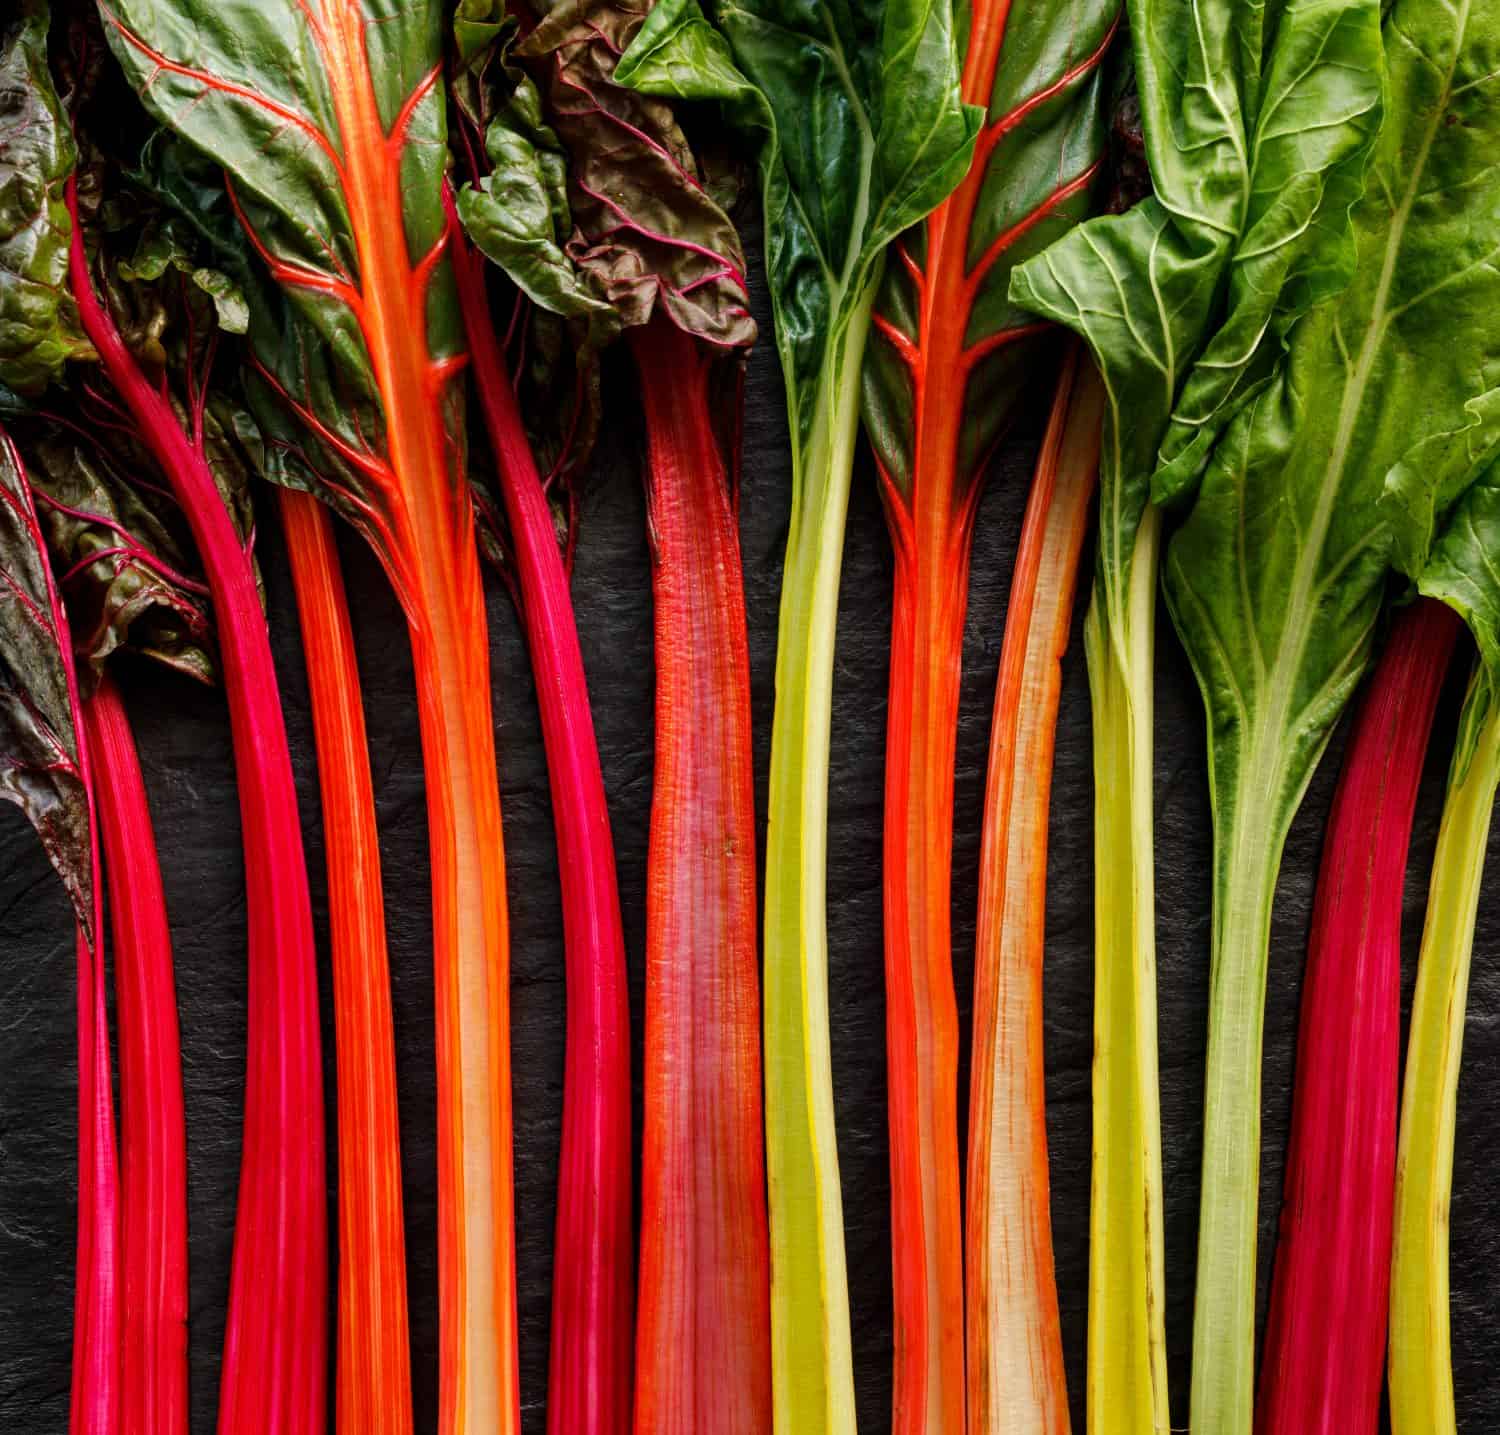 Swiss chard in different colors, multi colored  stems on a black background, top view